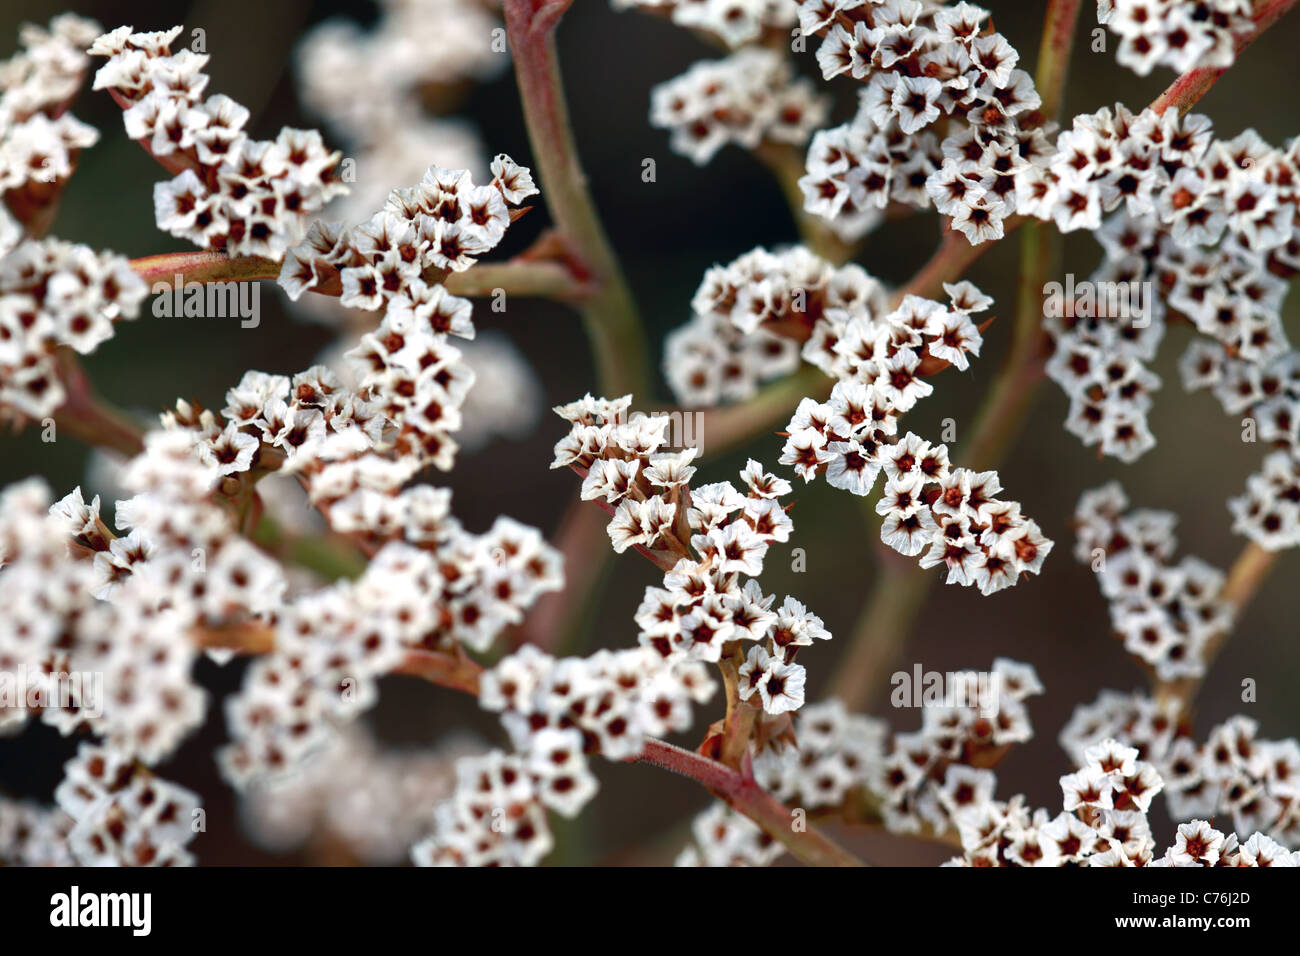 Small white flowers on a dark background Stock Photo